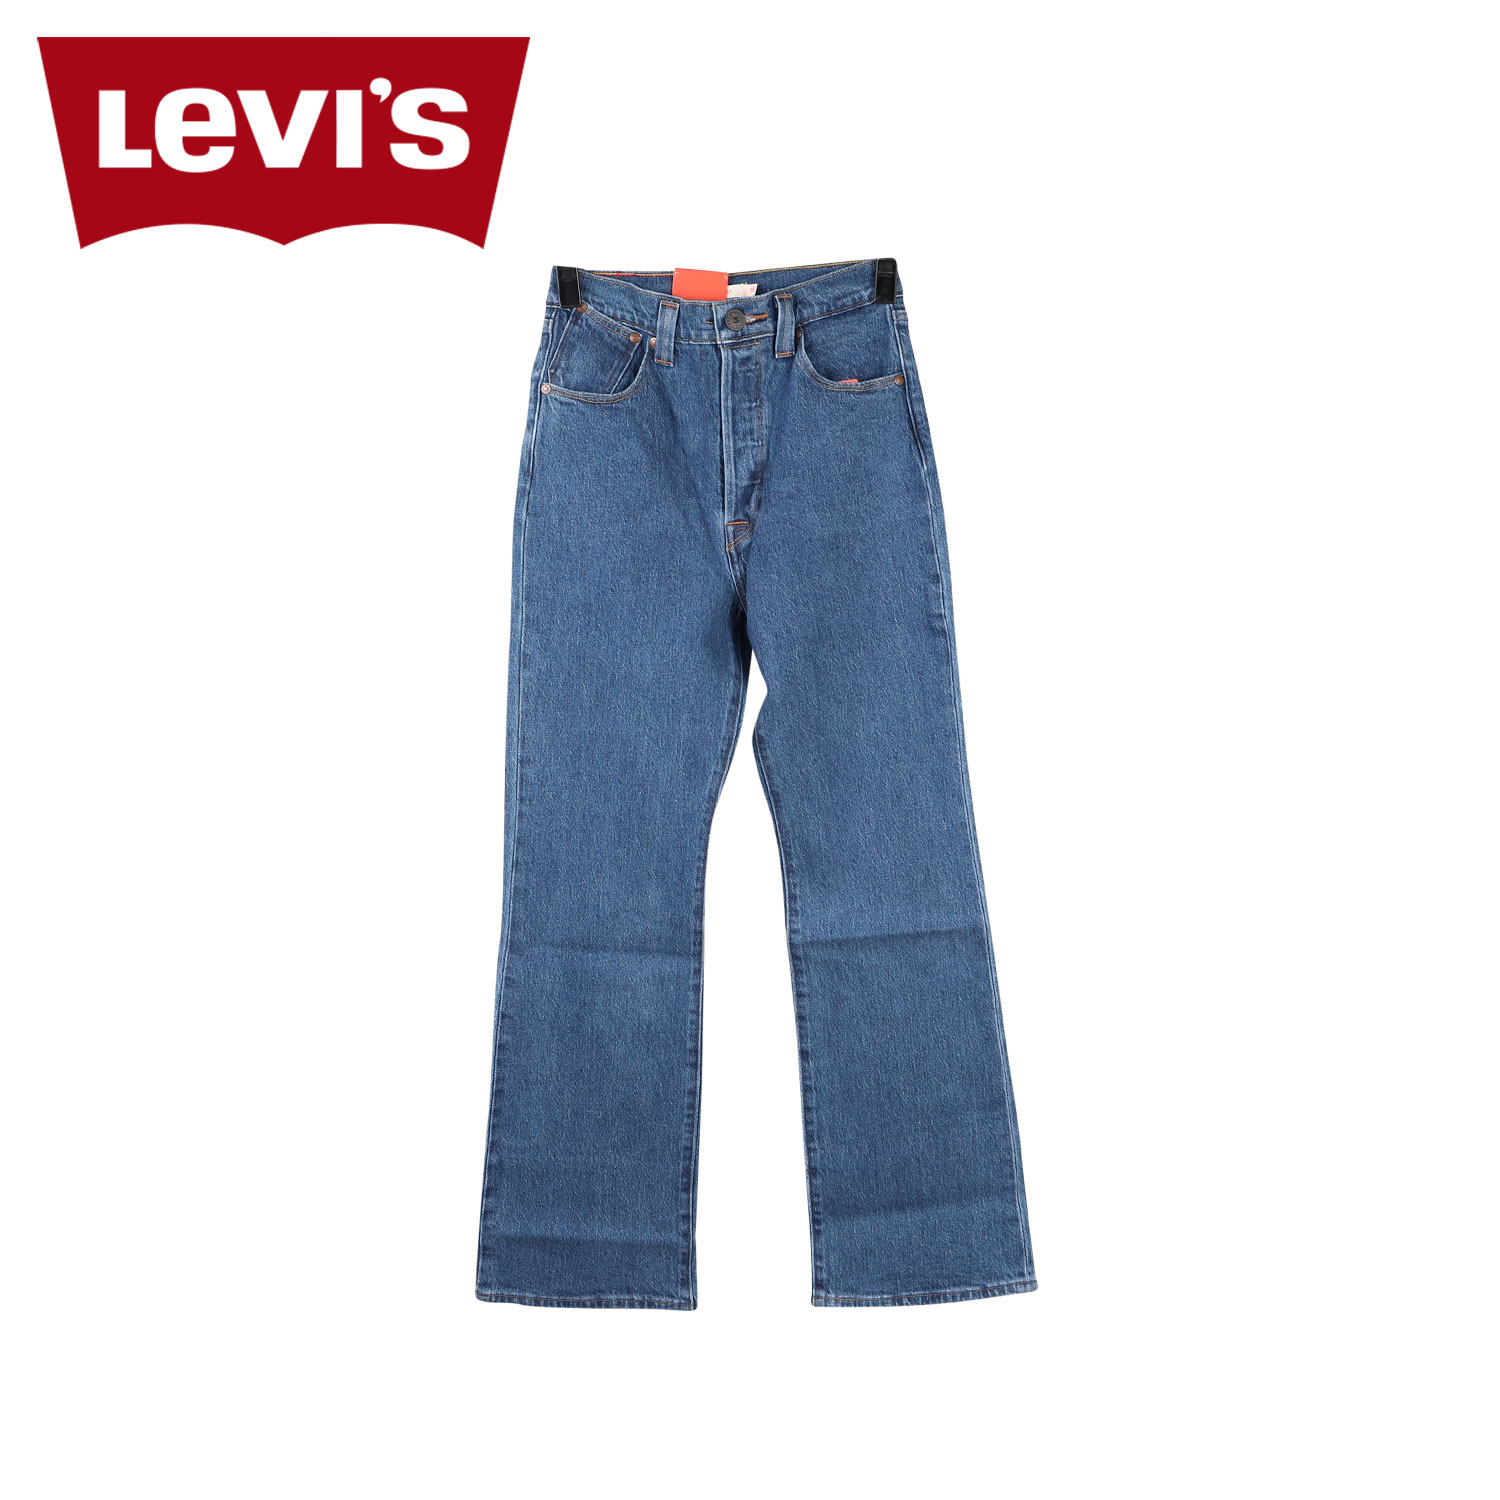 LEVIS RED ꡼Х å ǥ˥ѥ  ѥ ֥ ֡ ǥ RIBCAGE BOOT ֥롼 A2680-0000